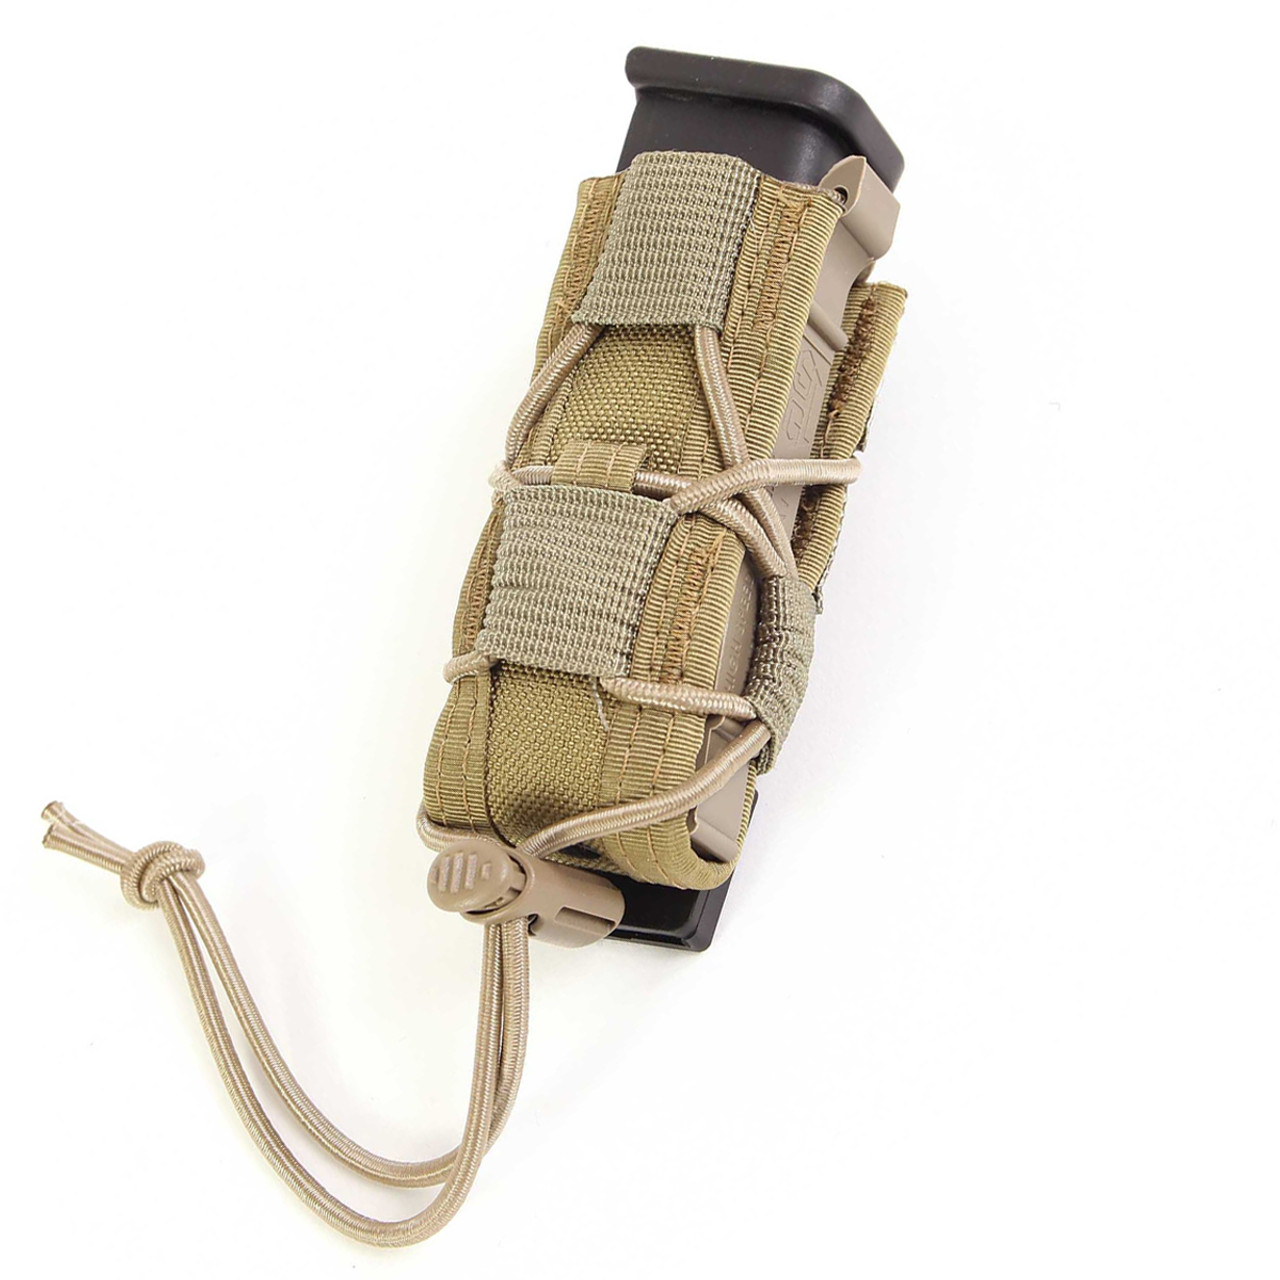 HSGI High Speed Gear PISTOL TACO MOLLE Single Mag Pouch 11PT00 NEW All Colors! 